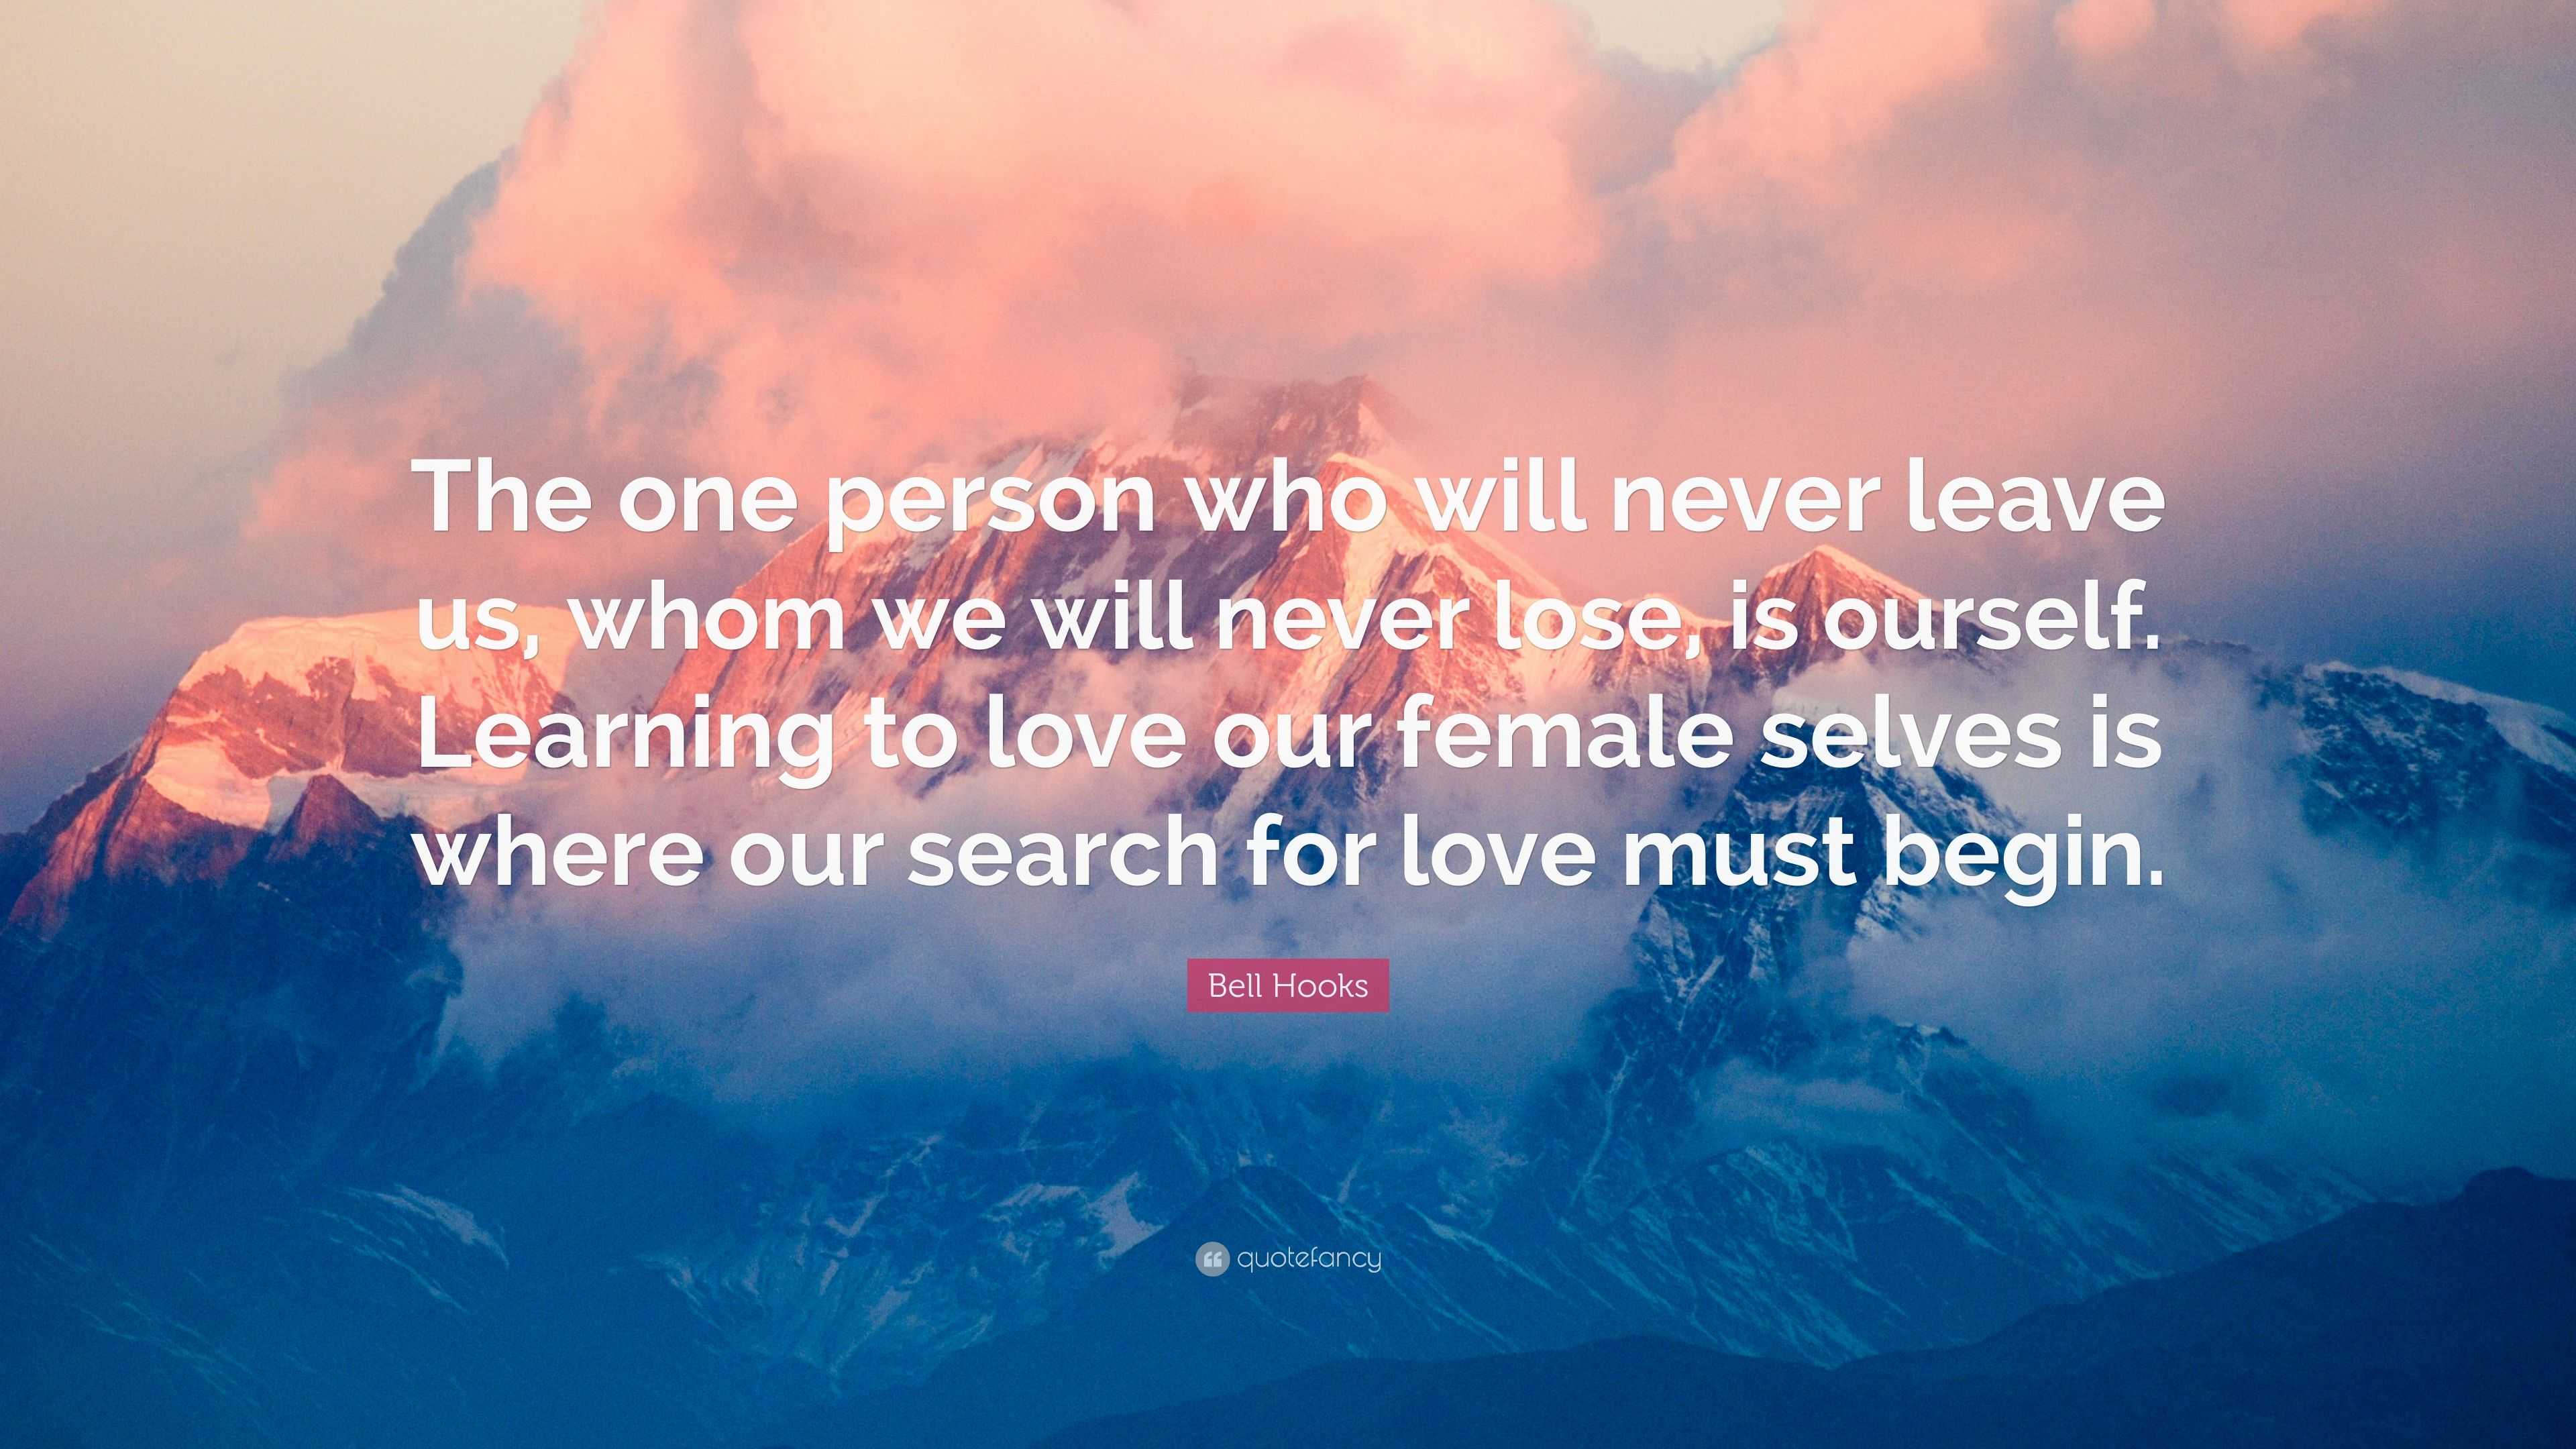 Bell Hooks Quote: “The one person who will never leave us, whom we will ...